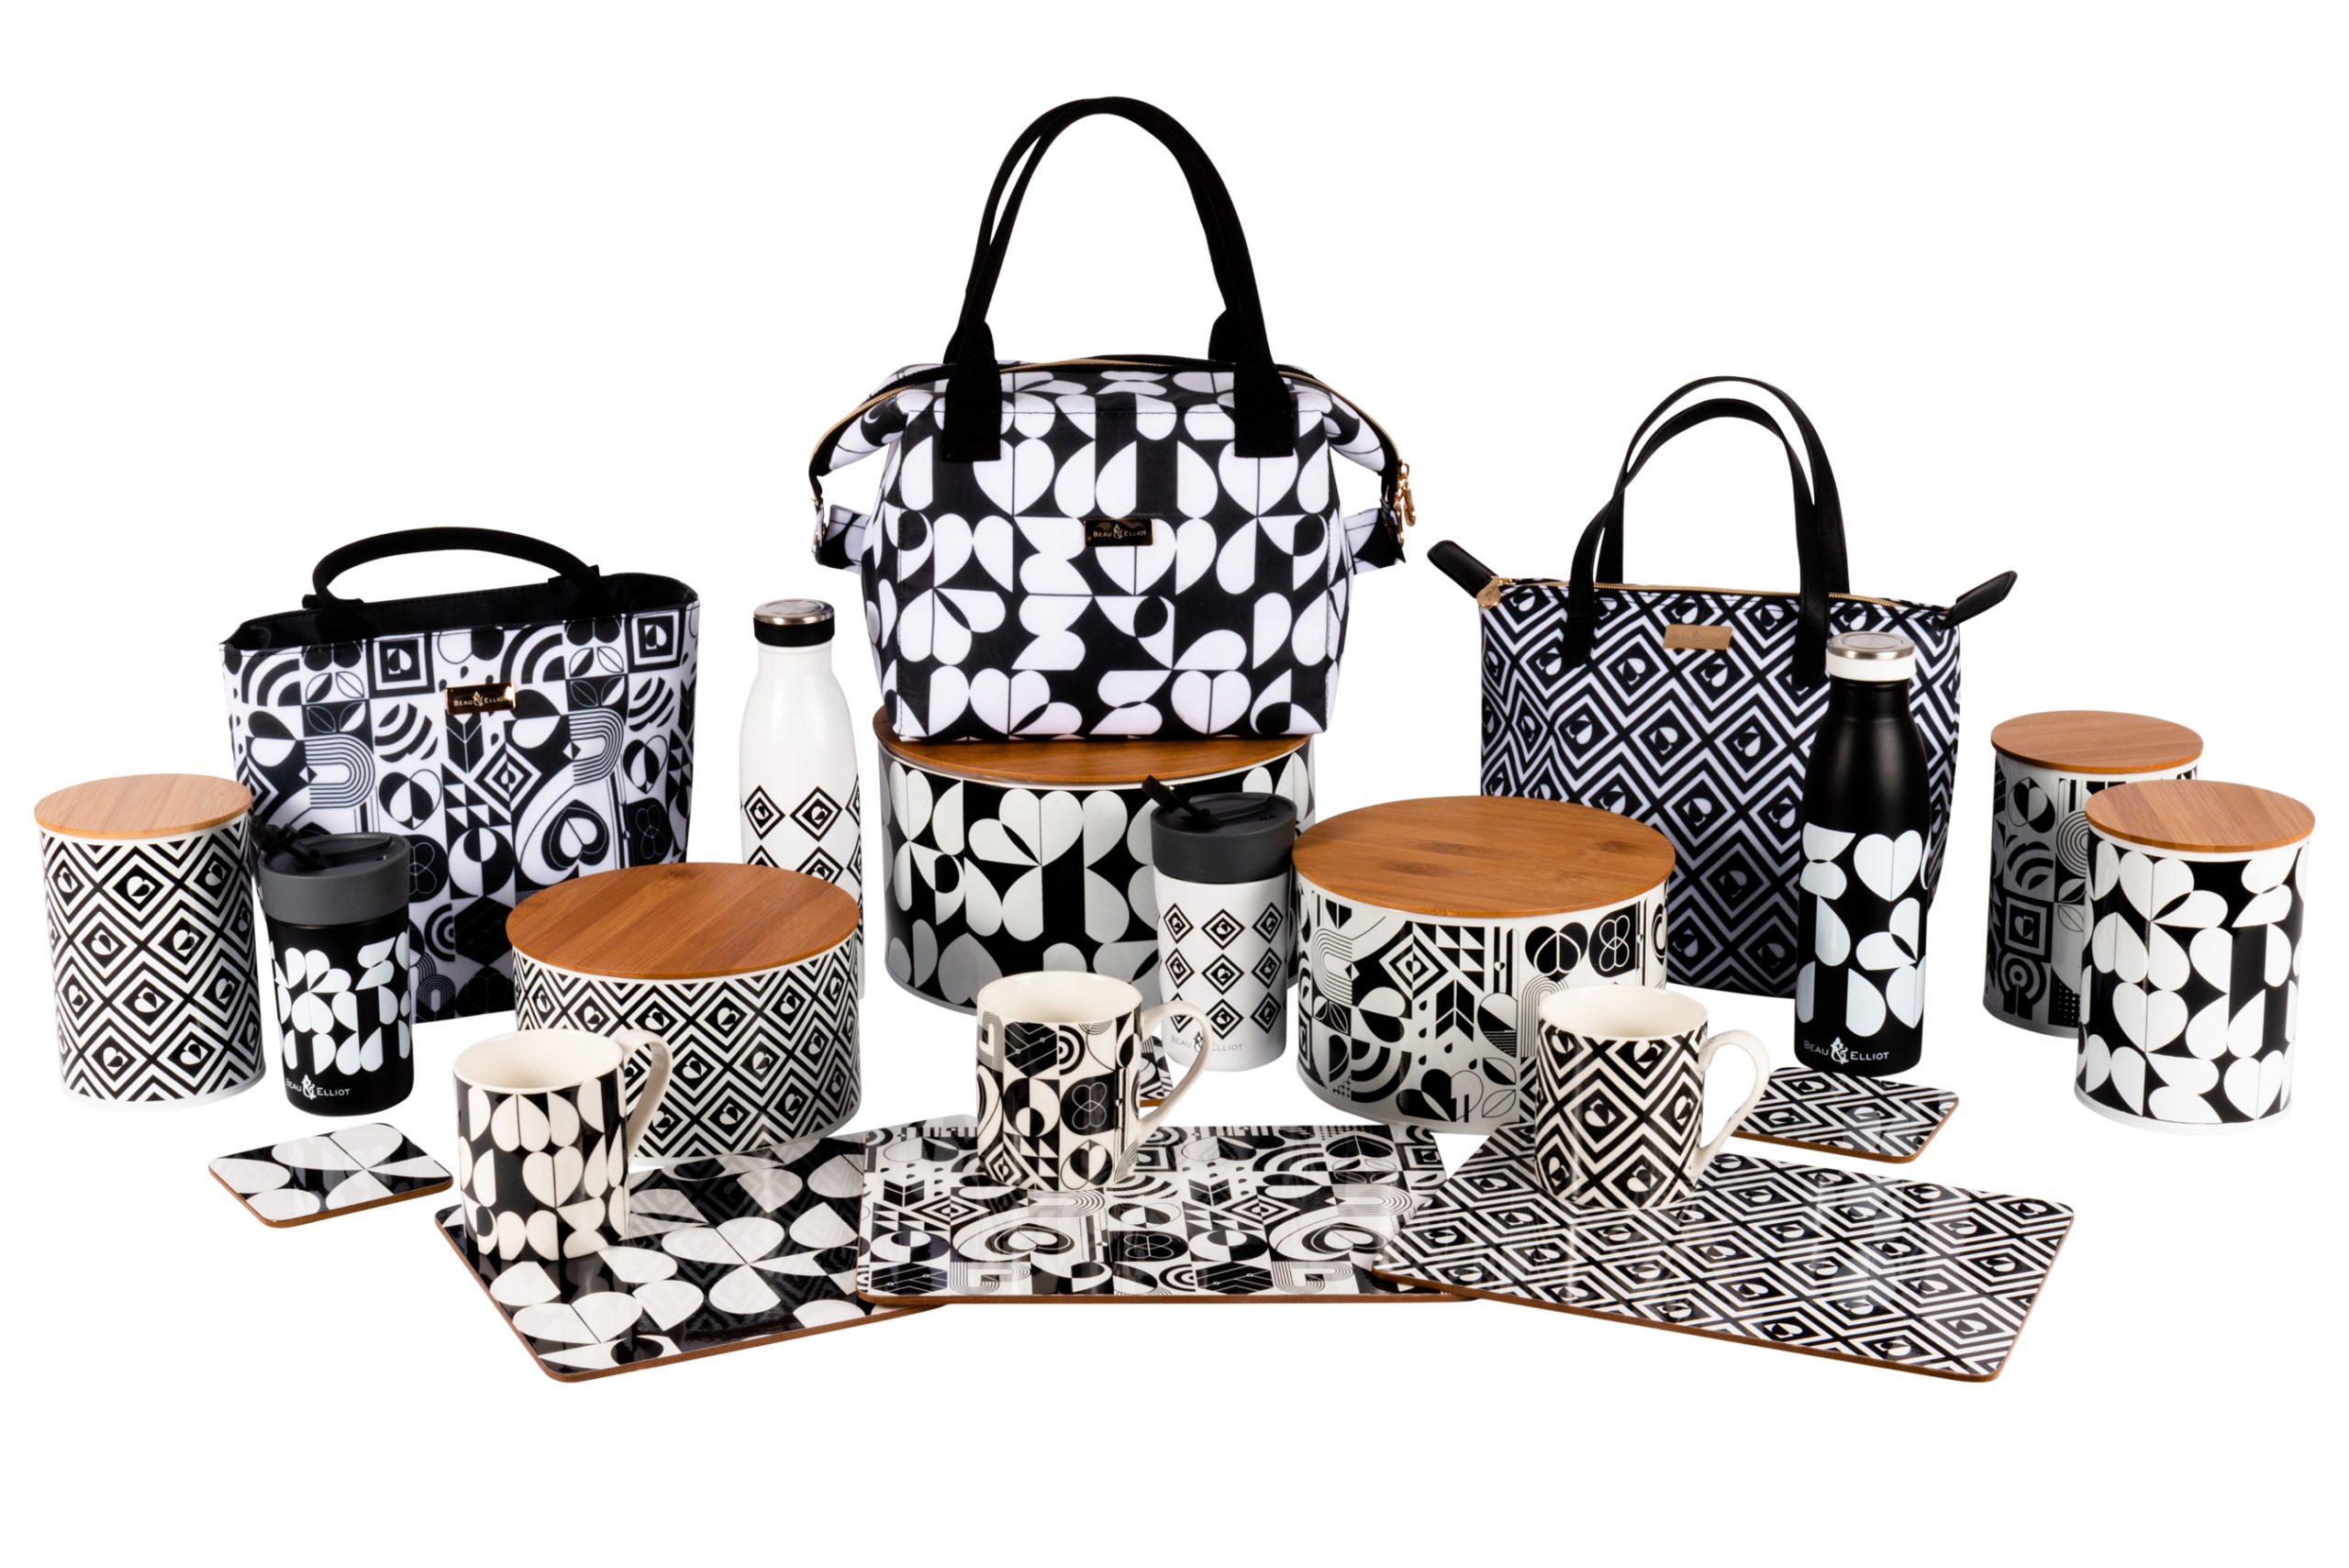 Monochrome Avant Garde Lunch Tote by Beau and Elliot